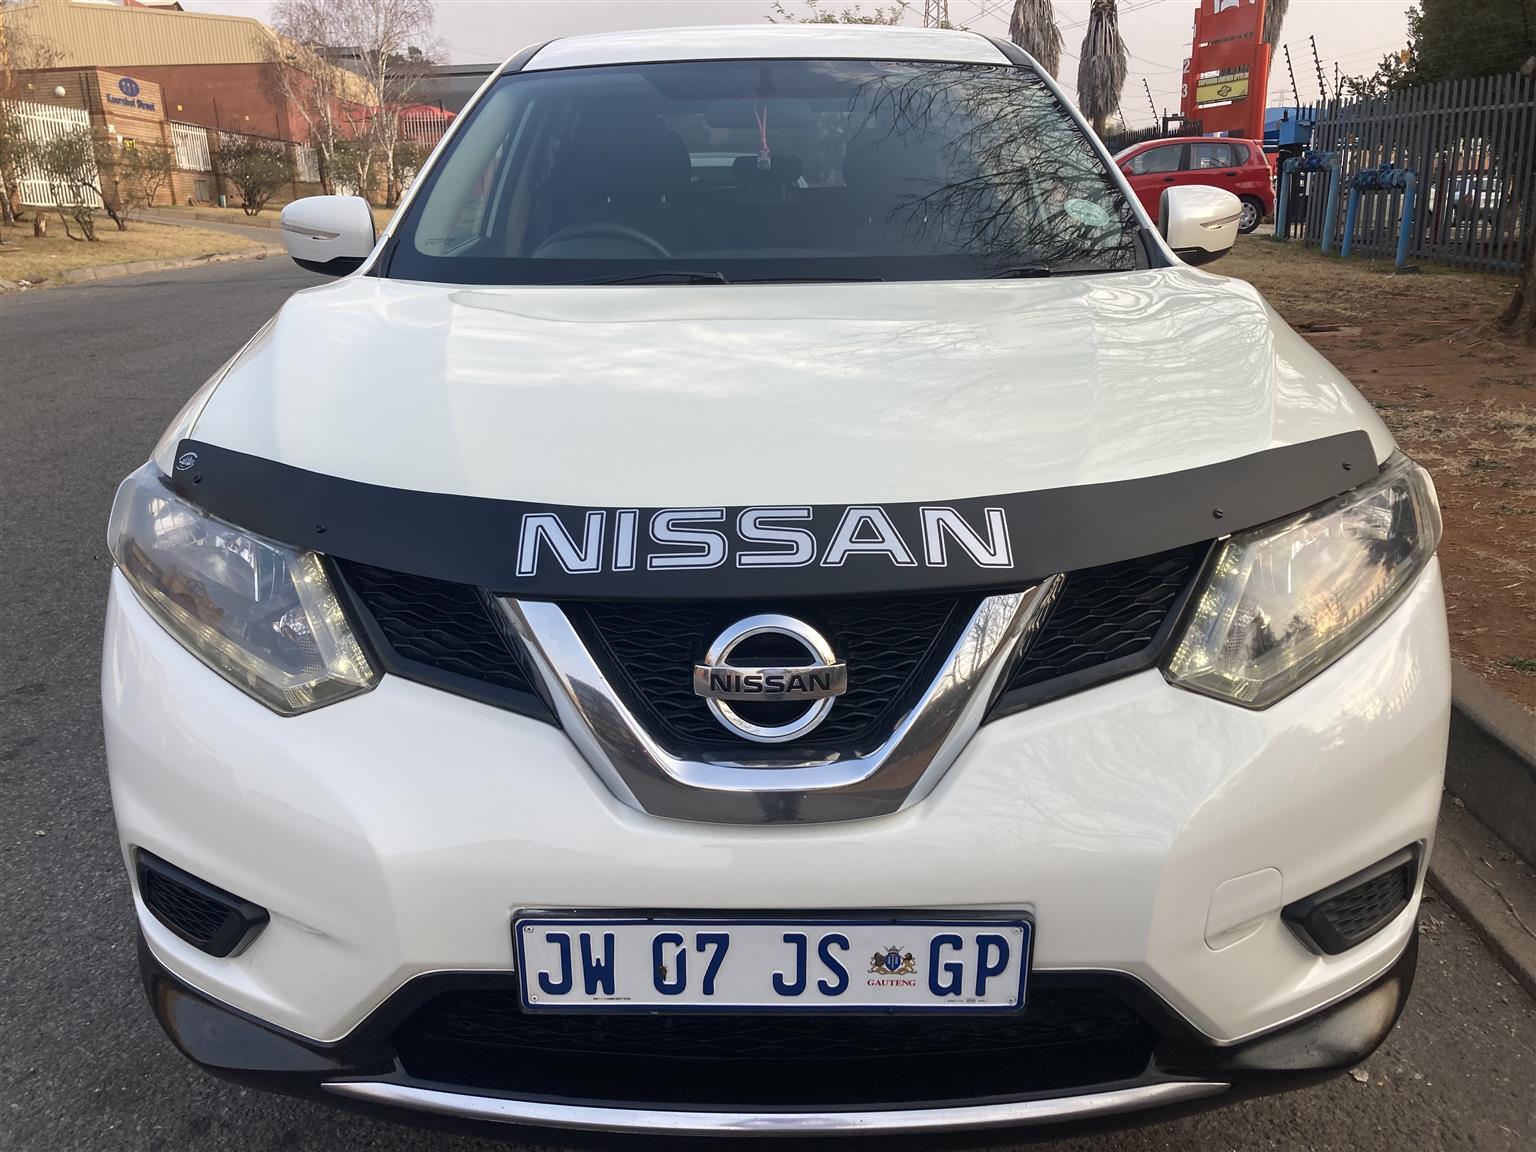 2015 Nissan X-Trail 1.6 DCi Manual for sale, urgent private sale, 7 seatet